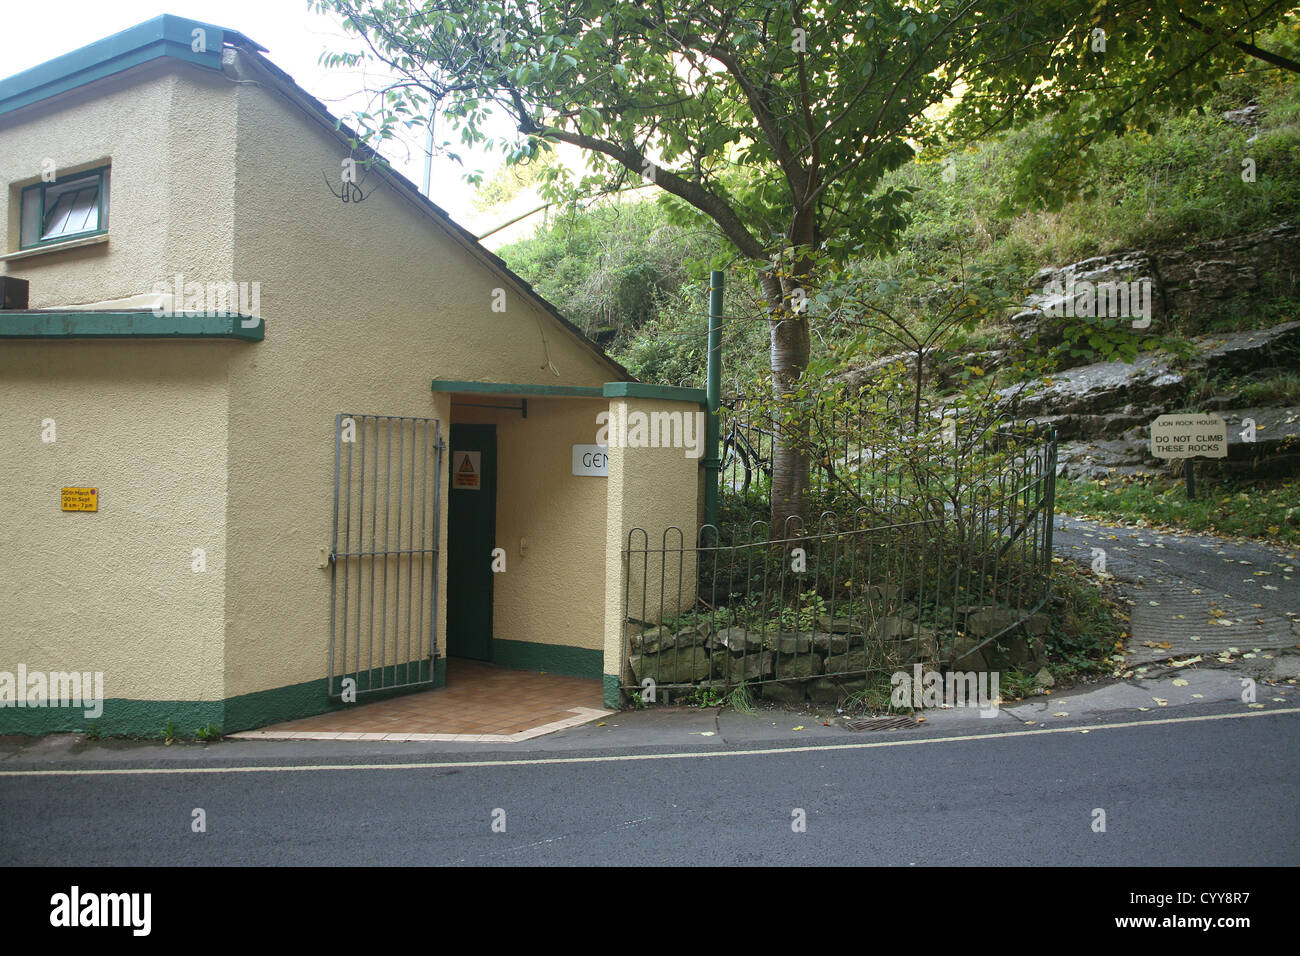 Entrance to the mens toilet block in Cheddar gorge, Somerset, England. October 2008 Stock Photo